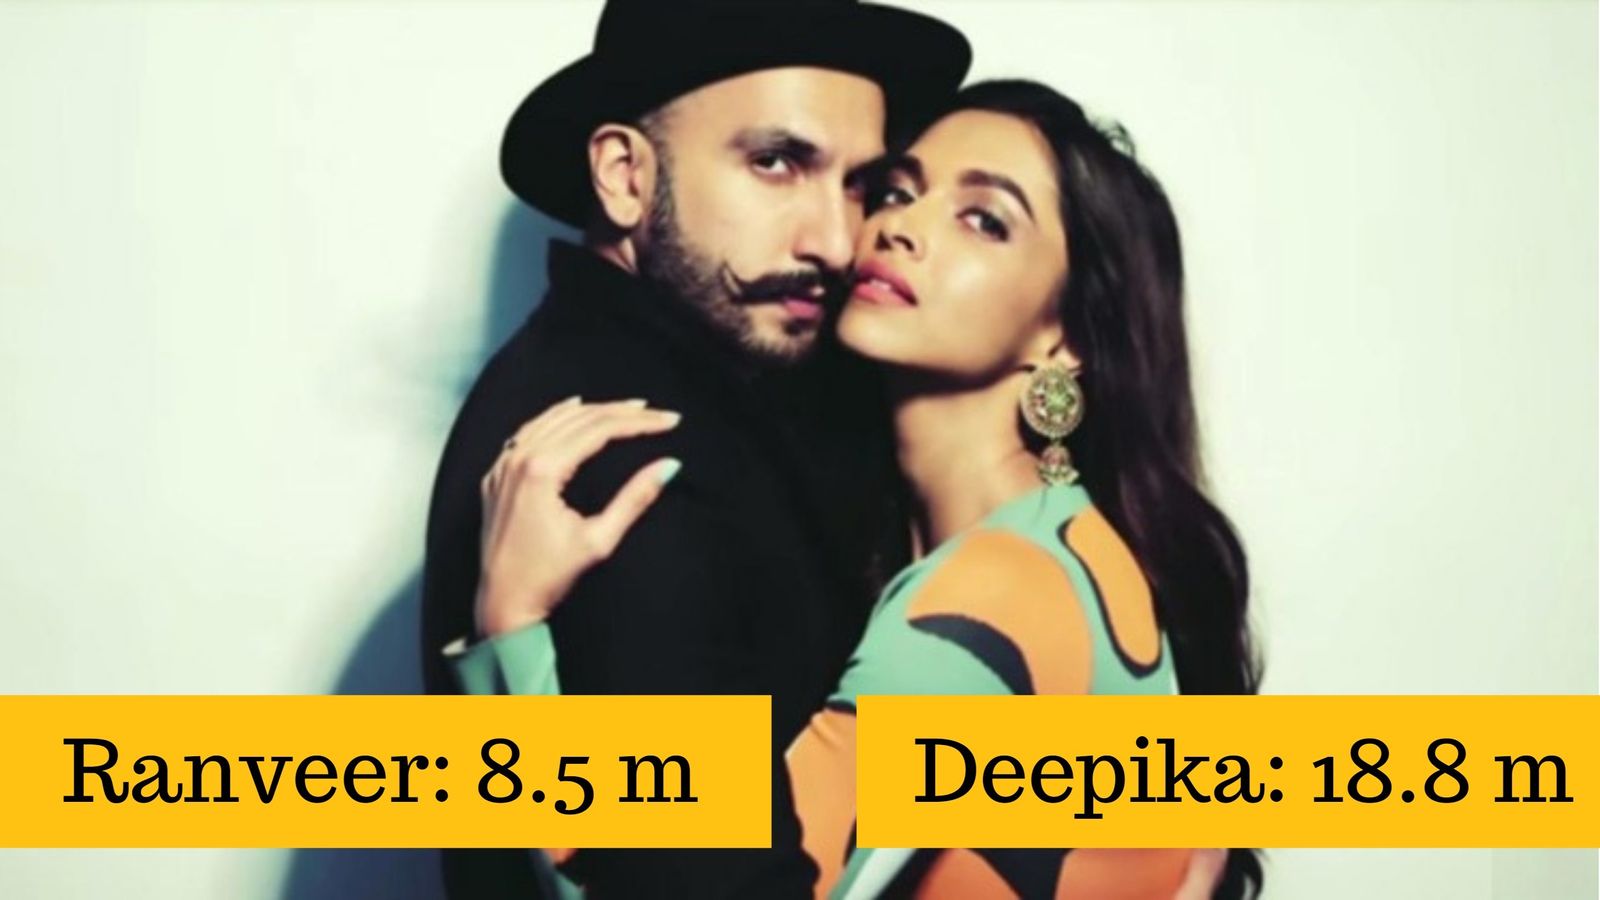 17 Popular Bollywood Couples And Who Has More Followers On Instagram Between Them